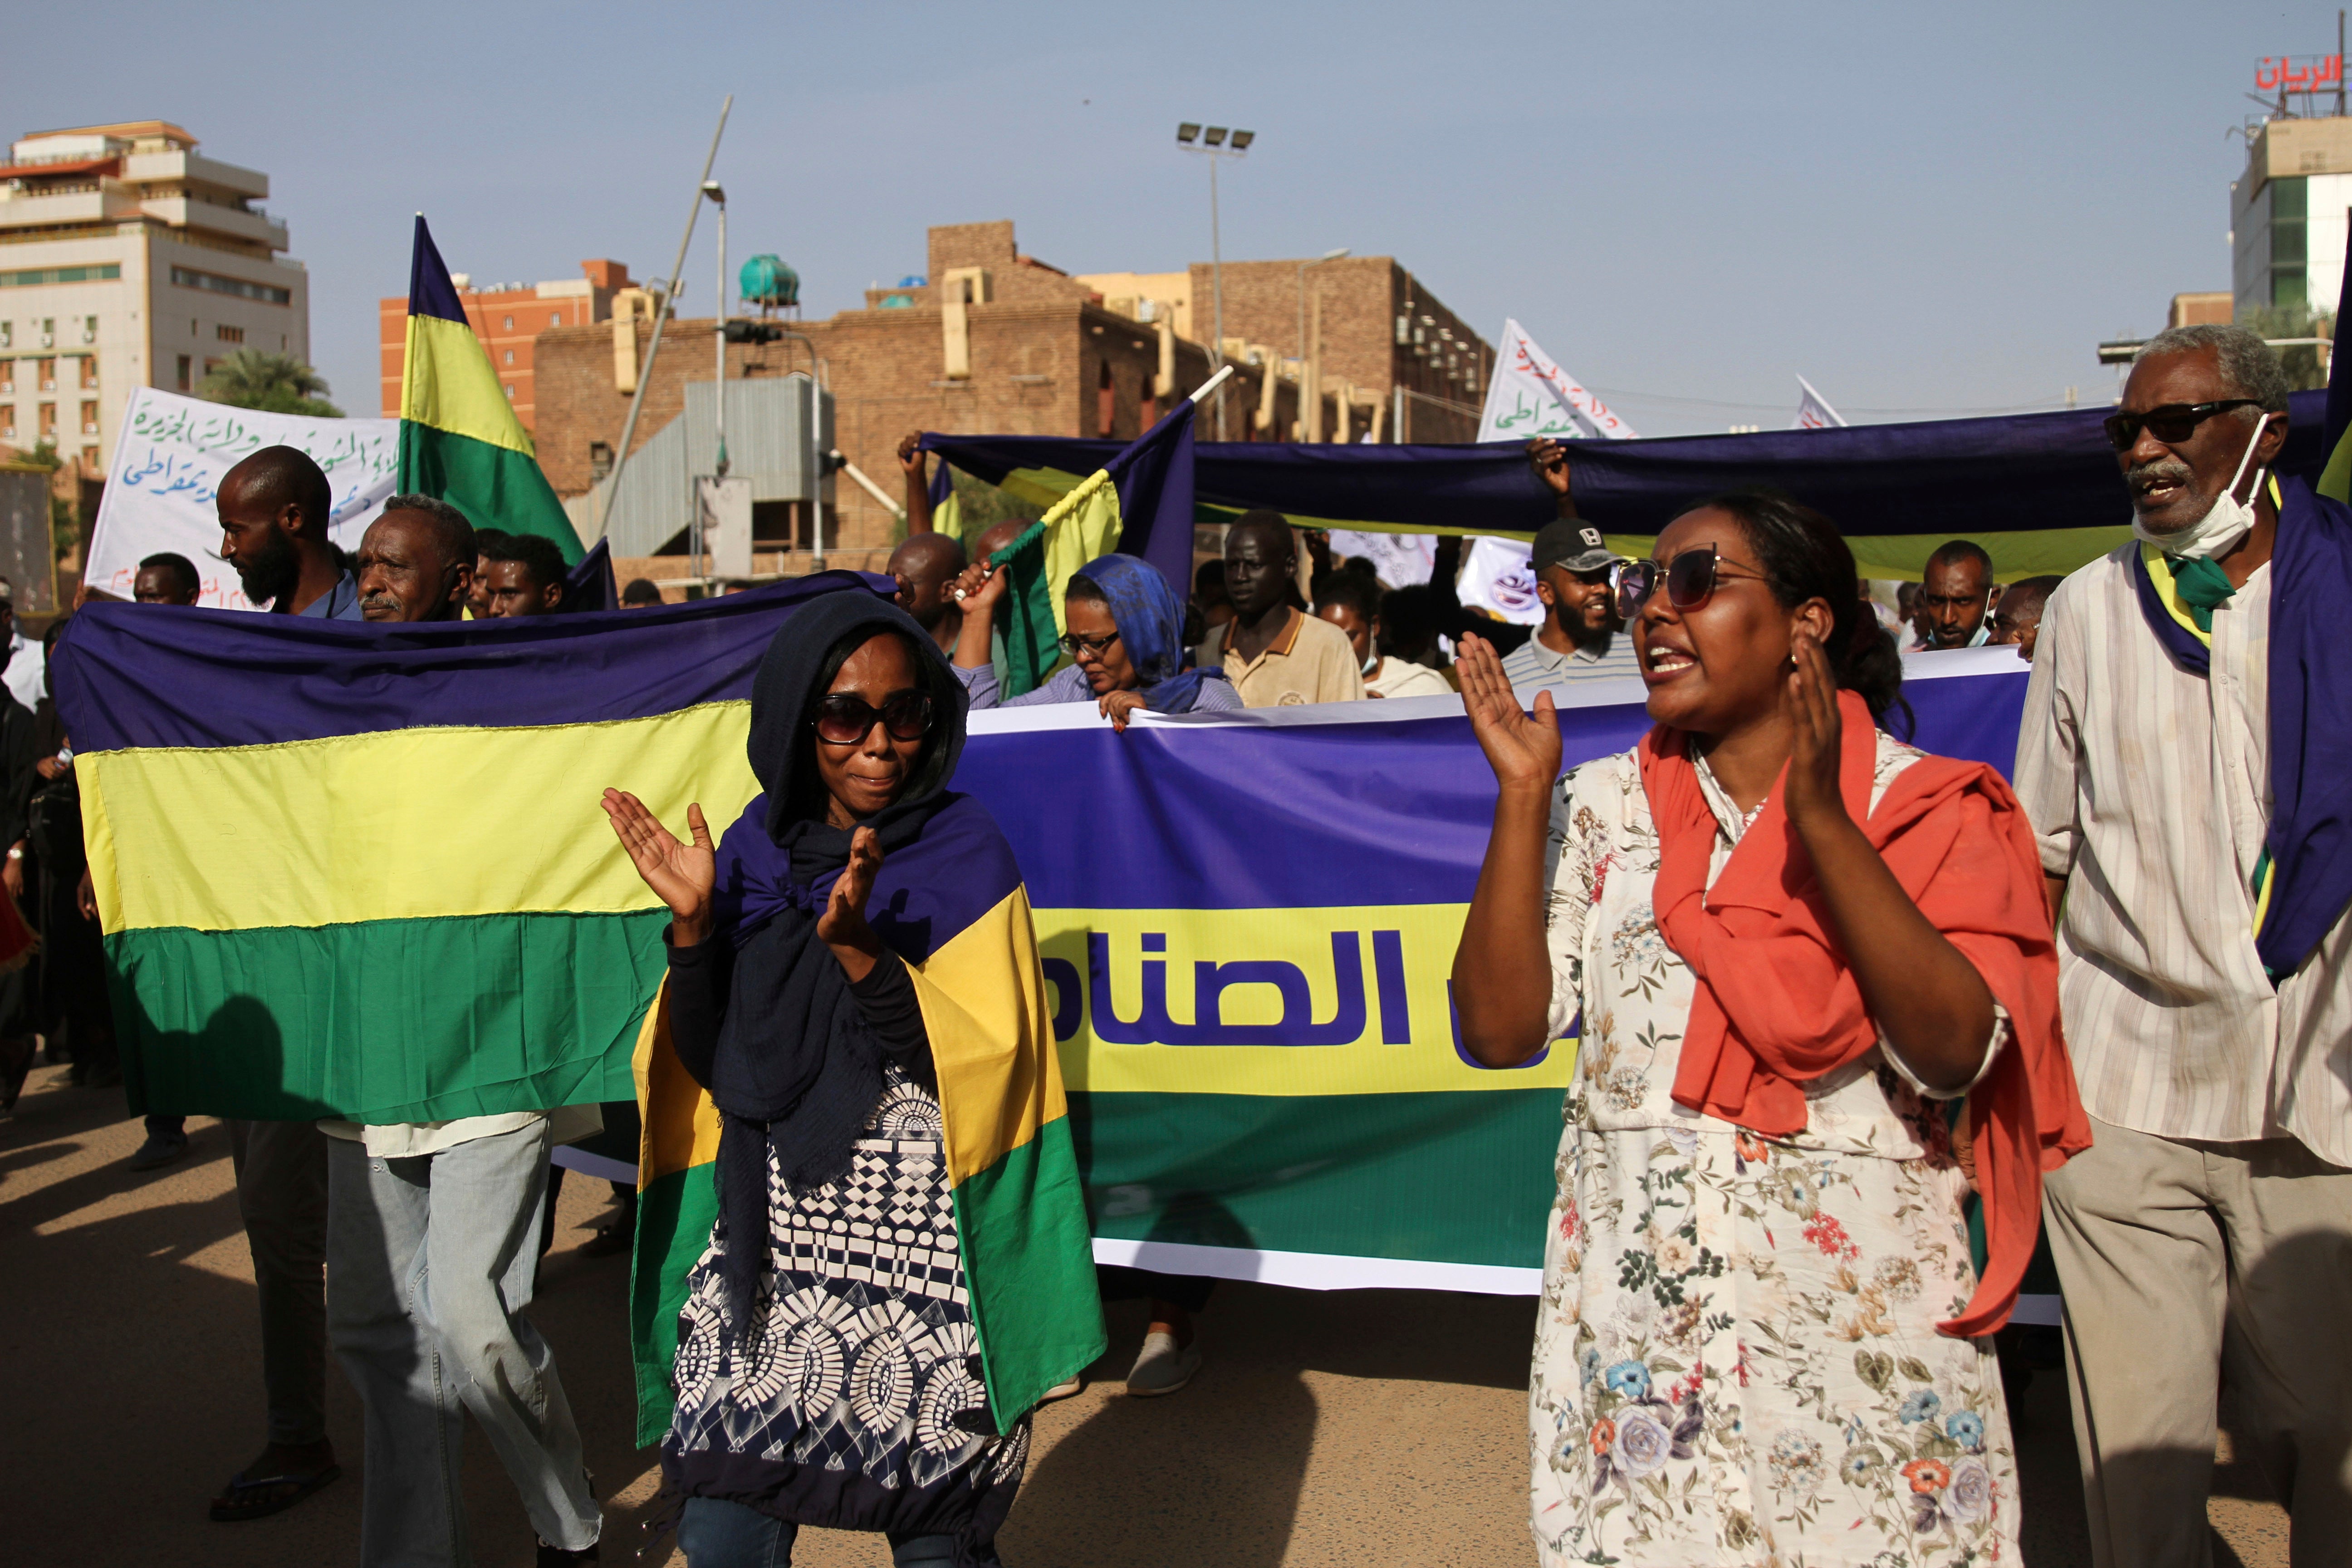 Thousands of Sudanese have rallied in the capital of Khartoum against the country's military and demanding the formation of new civilian transitional authorities